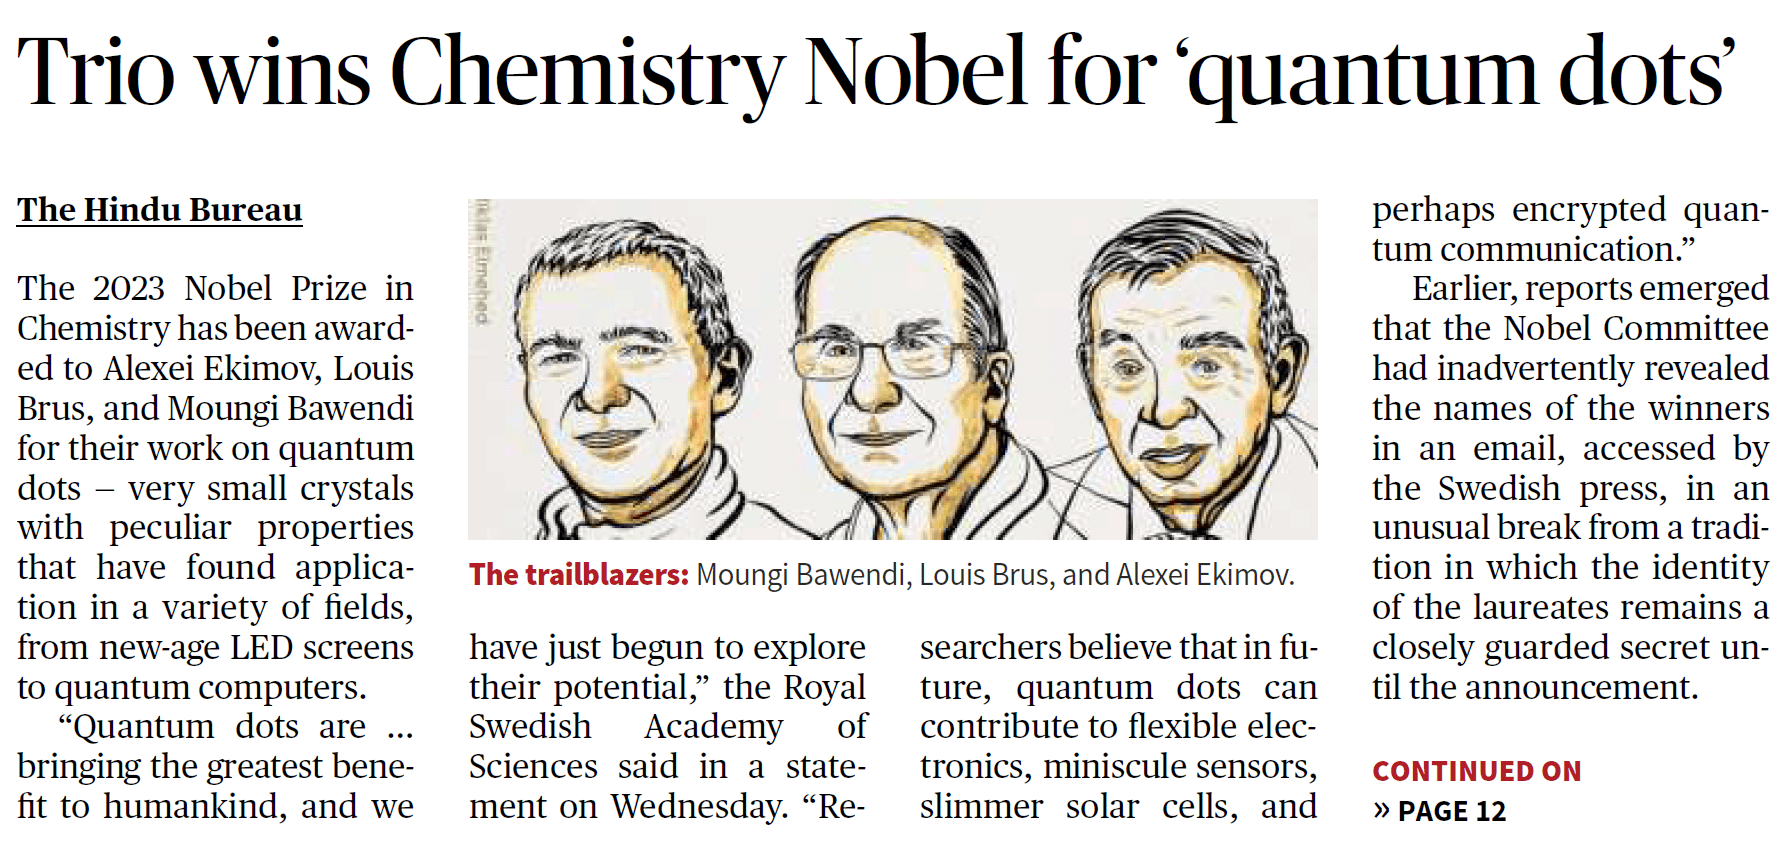 The 2023 Nobel Prize in Chemistry has been awarded to Alexei Ekimov, Louis Brus, and Moungi Bawendi for their work on quantum dots